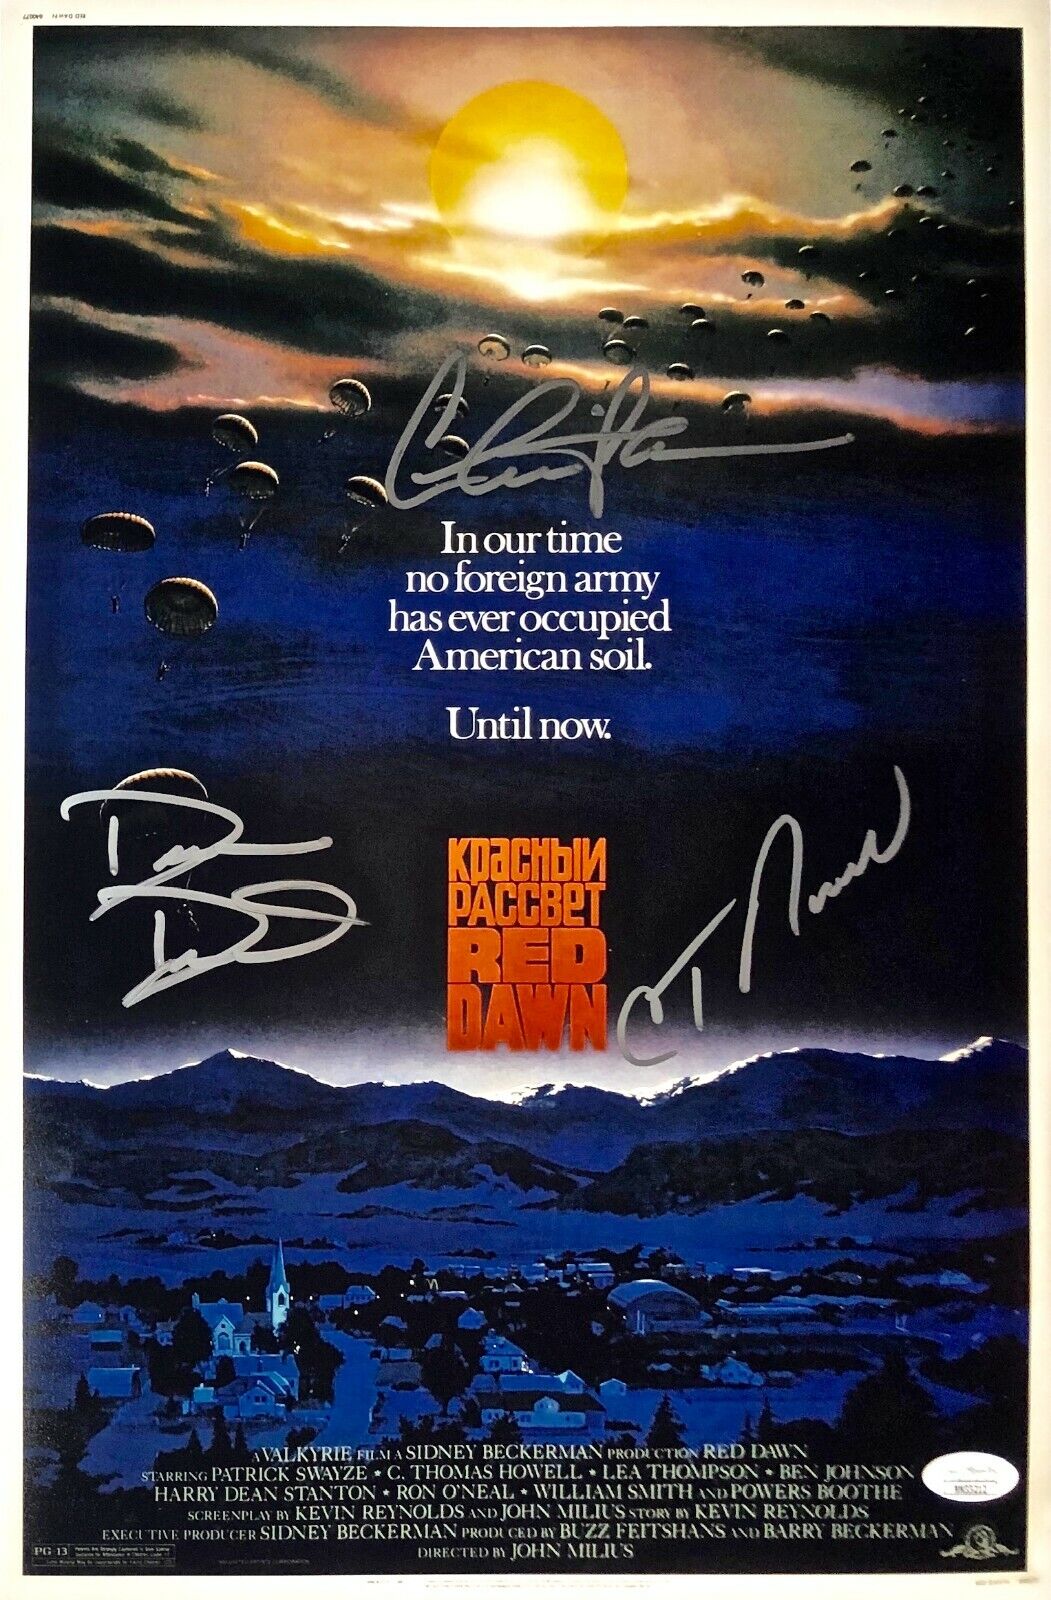 CHARLIE SHEEN Autograph SIGNED 11x17 RED DAWN Photo Poster painting C.J. HOWELL DALTON JSA CERT